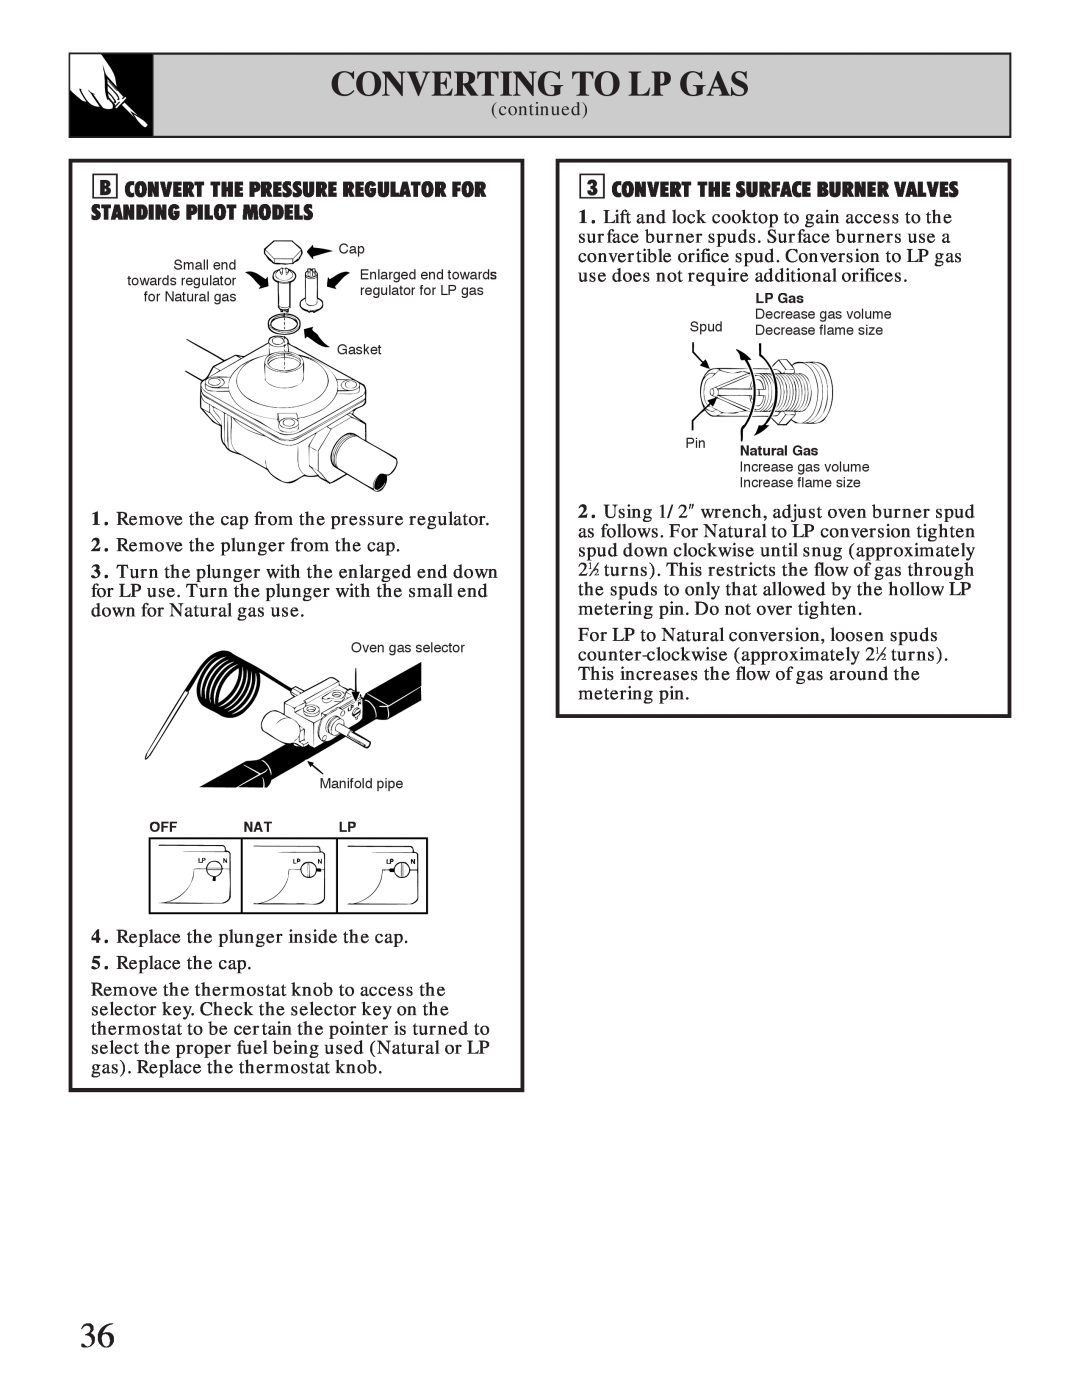 Hotpoint RGB506 installation instructions Converting To Lp Gas, Convert The Surface Burner Valves 